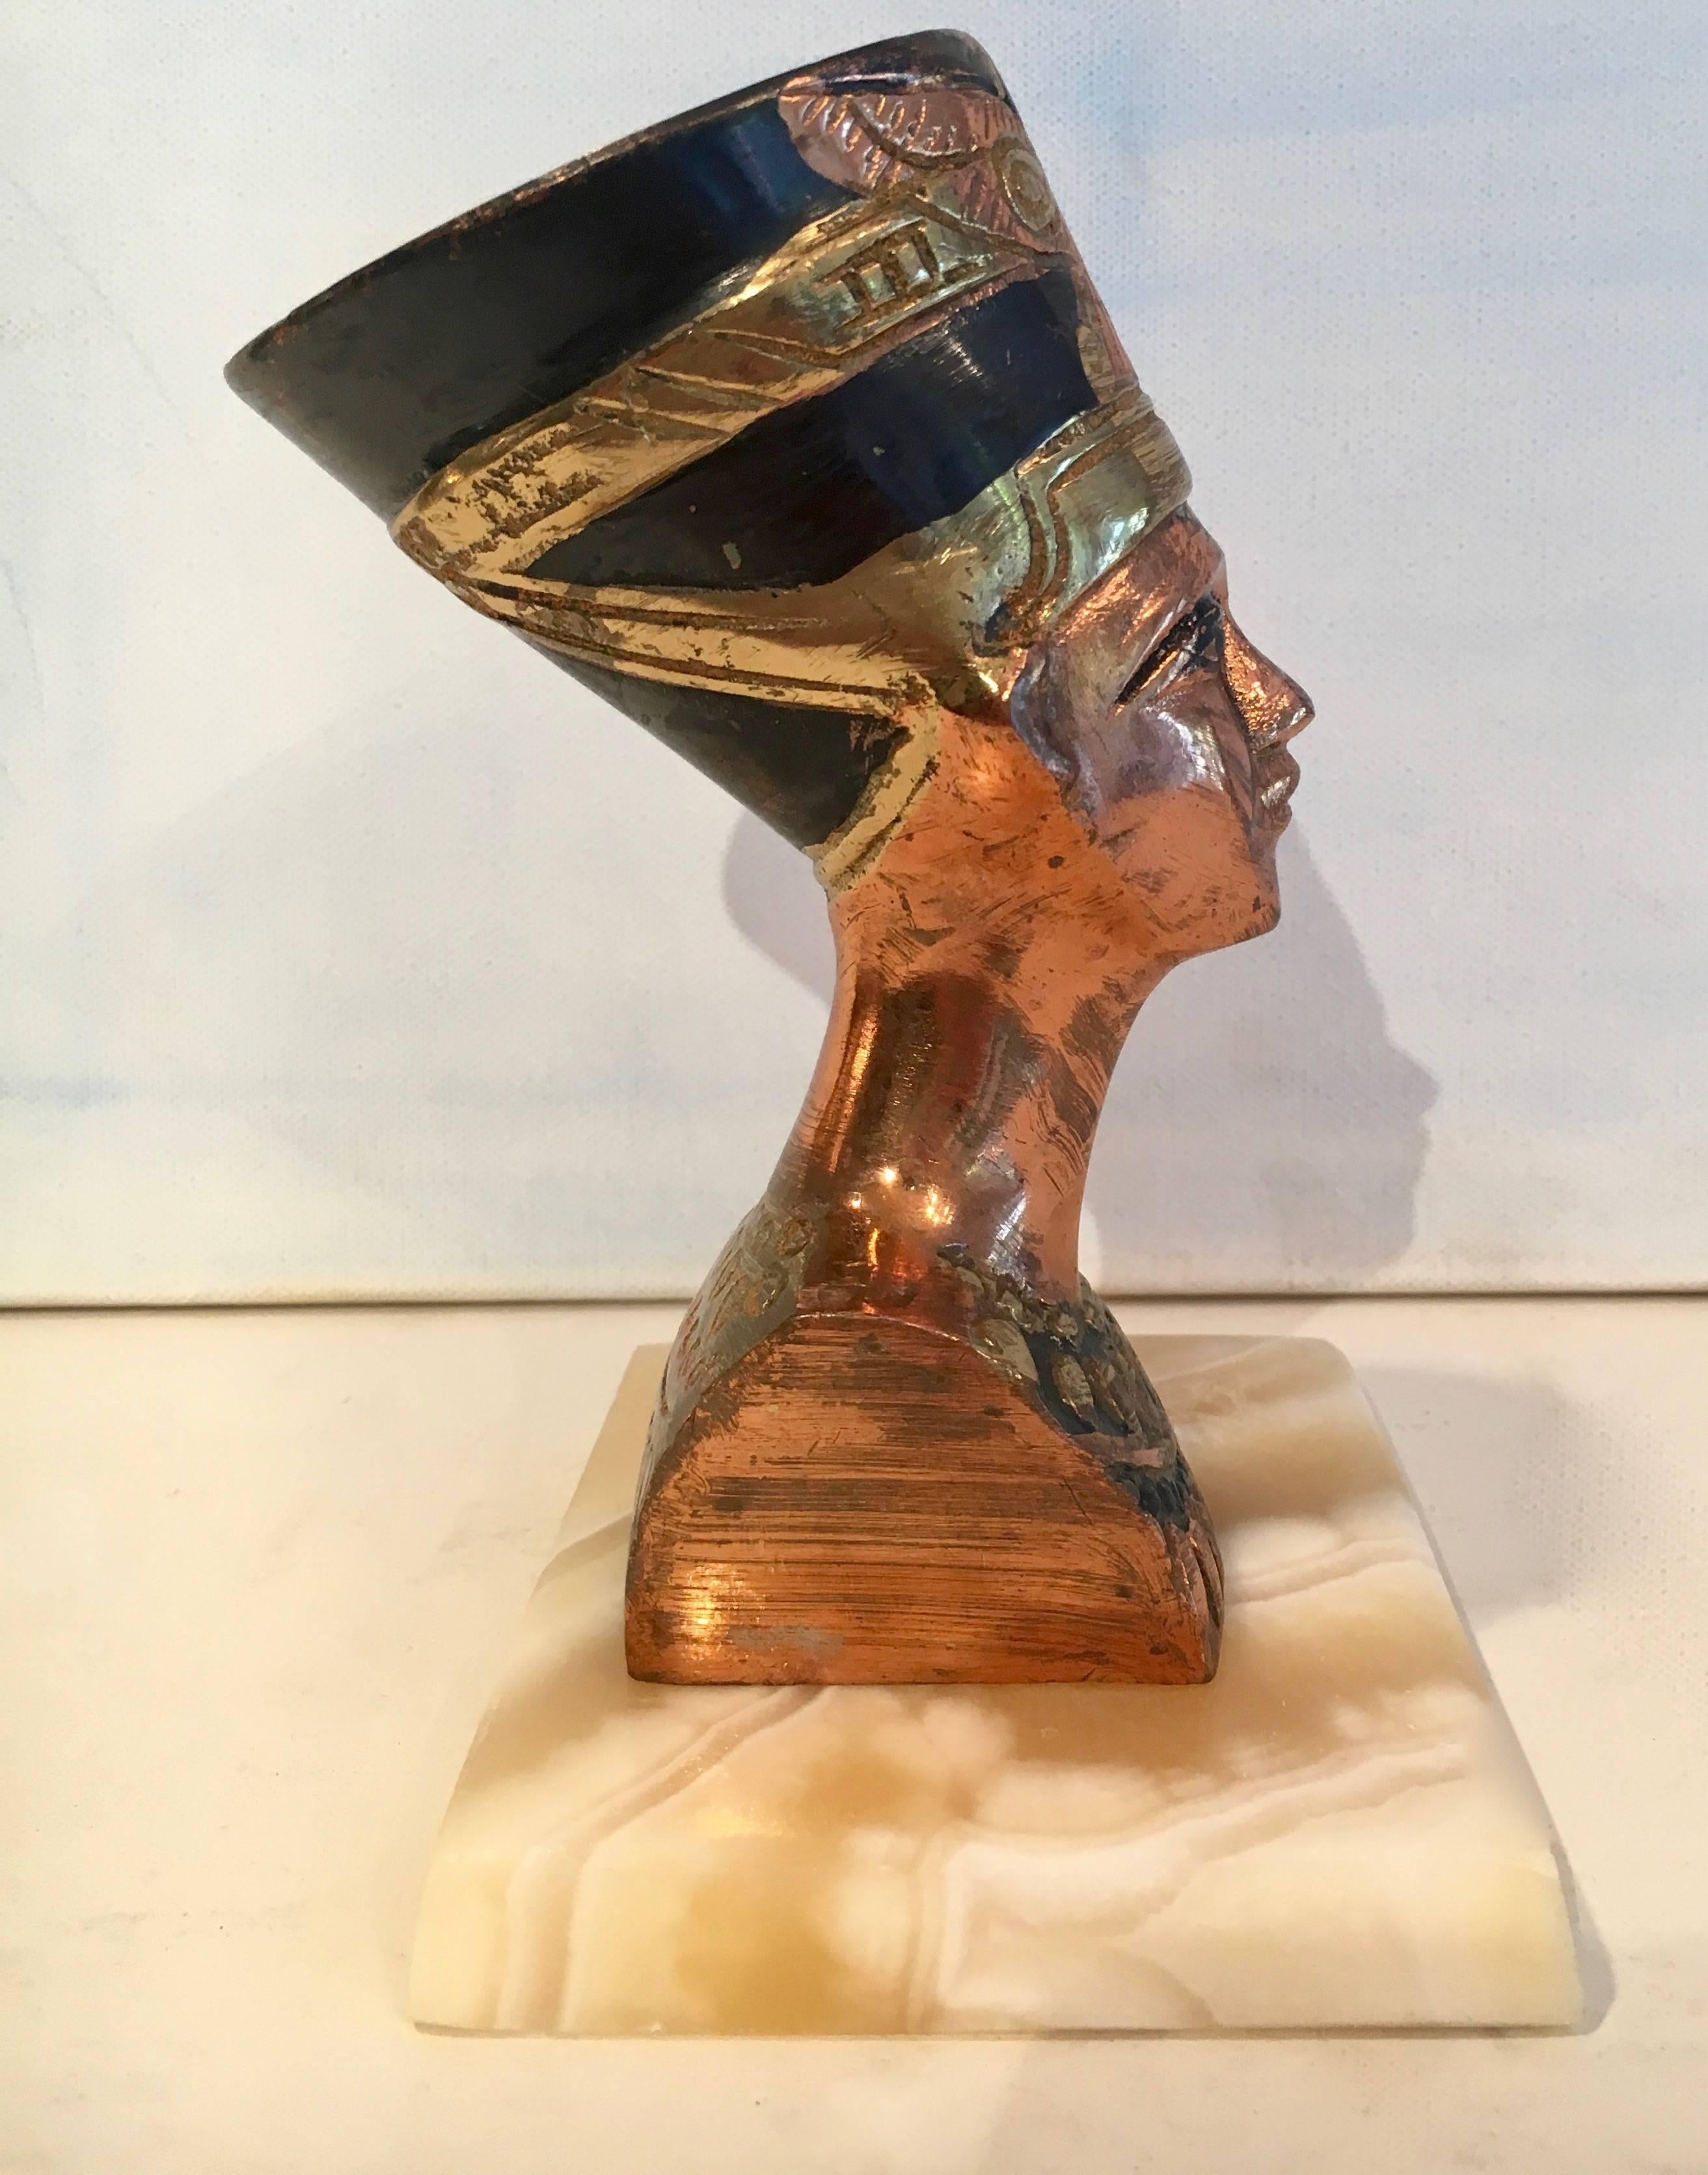 Cleopatra or Sphinx Statue, perhaps a collectible Museum sold piece.

Makes a great paper weight of simply decor on a nearby shelf, suited for any room.